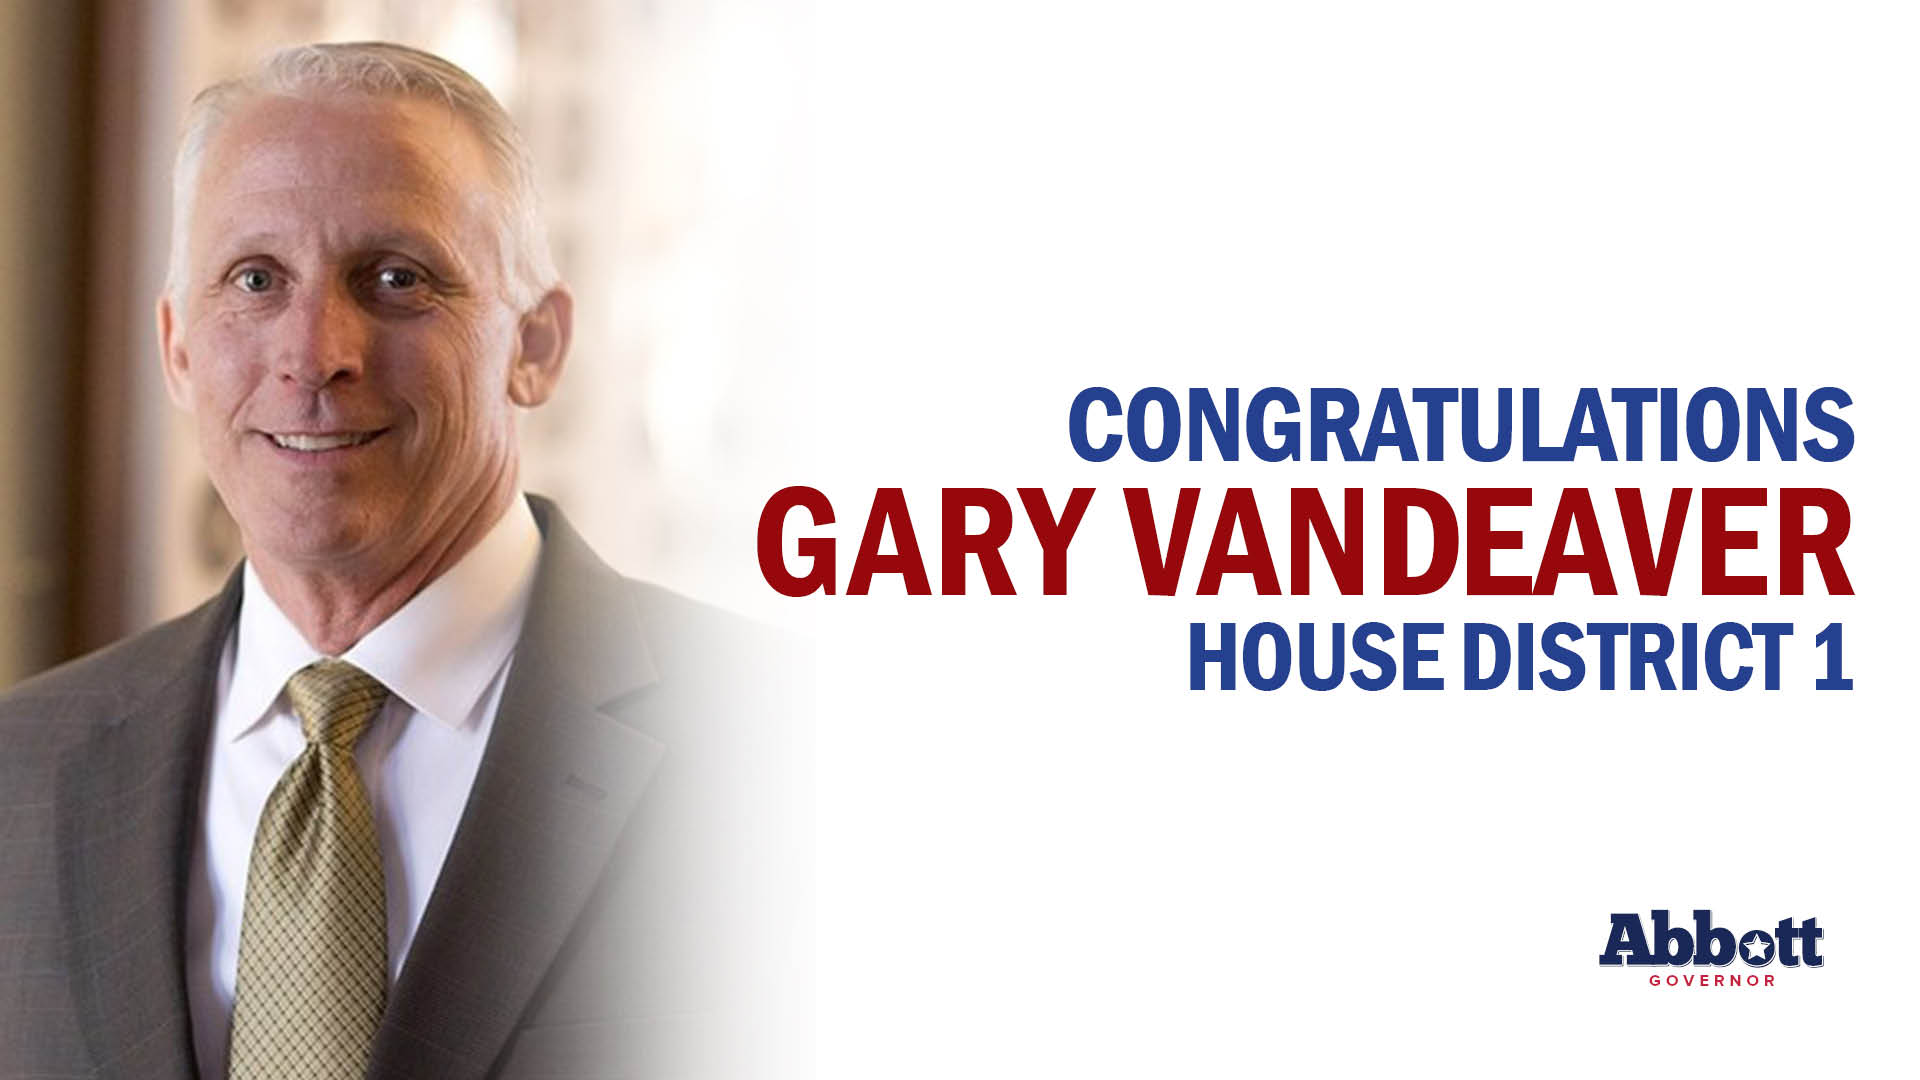 Governor Abbott Congratulates Rep. Gary VanDeaver On Re-Election Victory